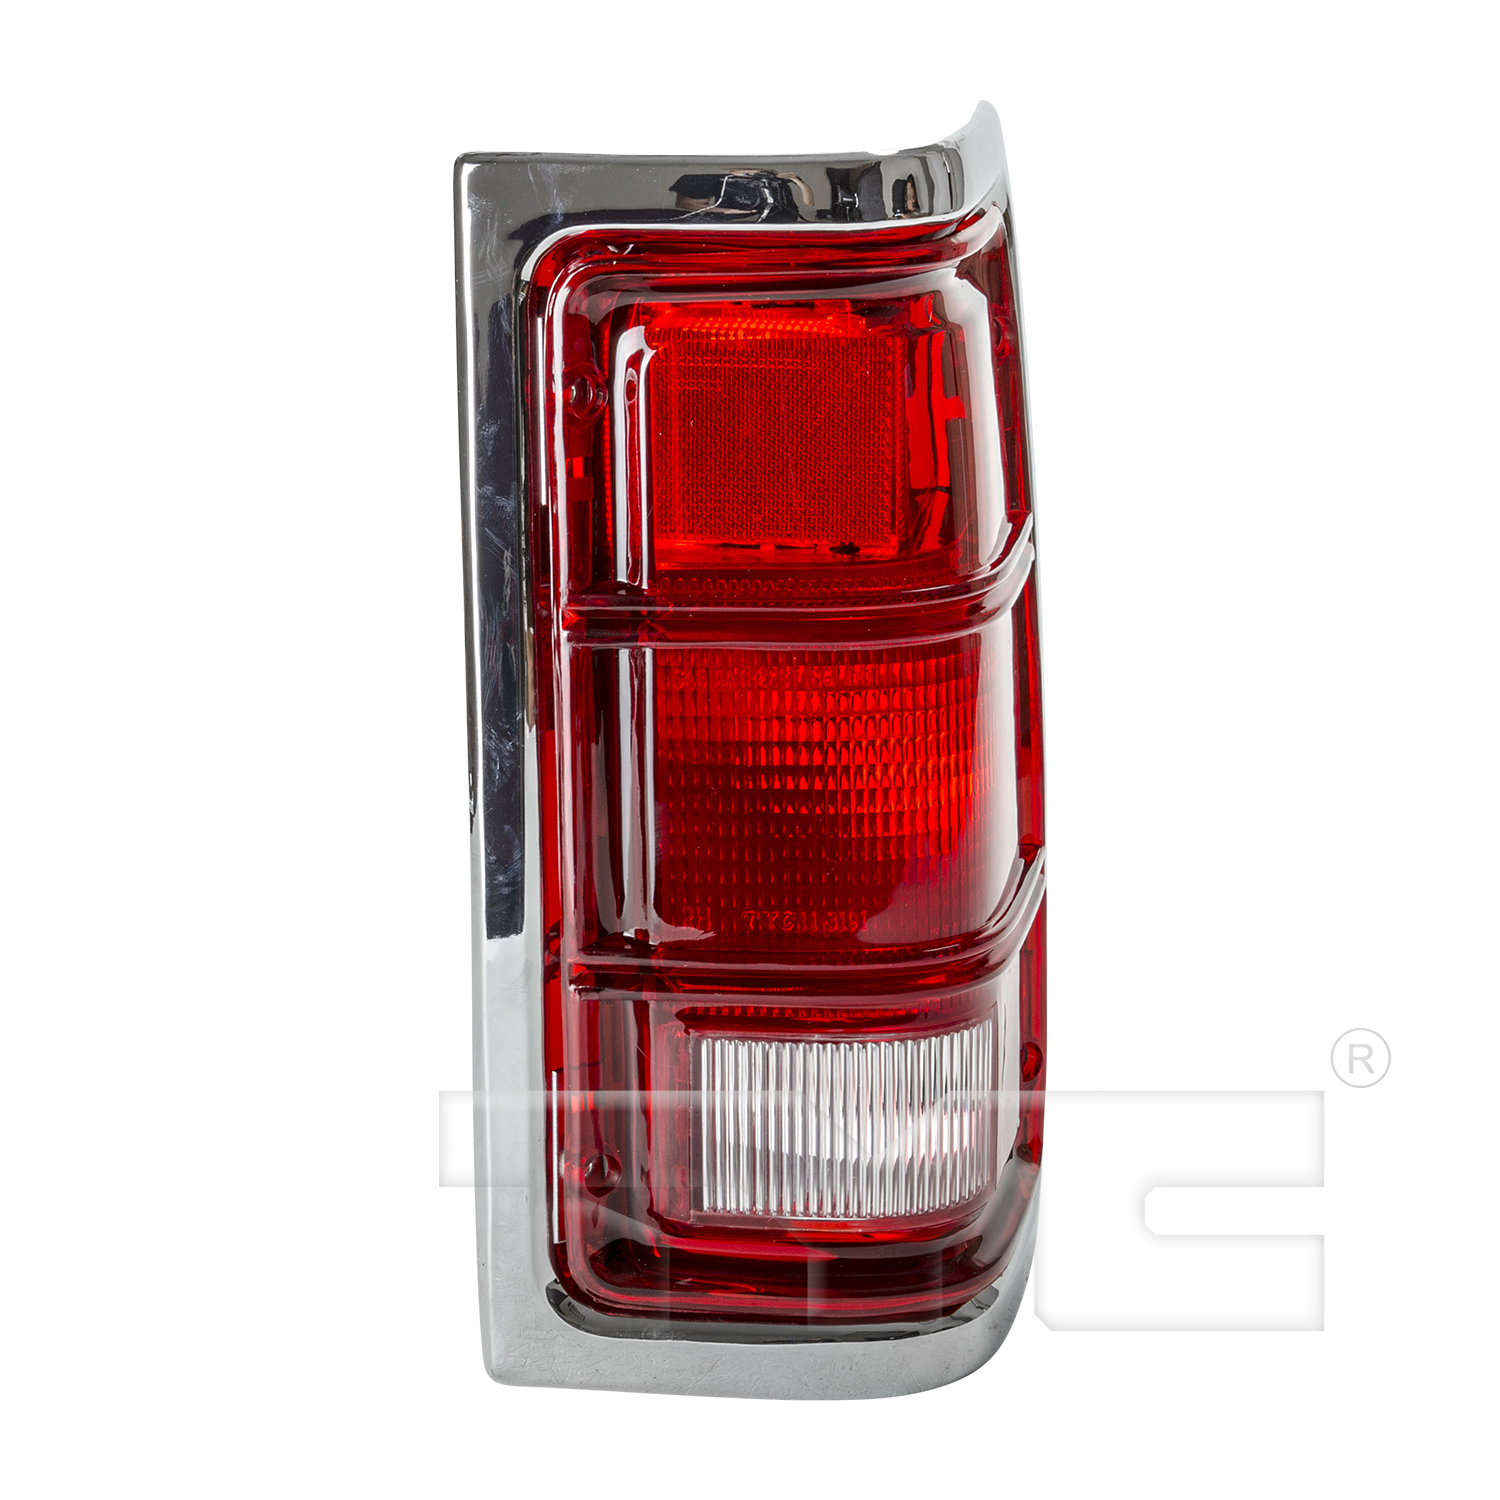 Aftermarket TAILLIGHTS for DODGE - D150, D150,87-91,RT Taillamp lens